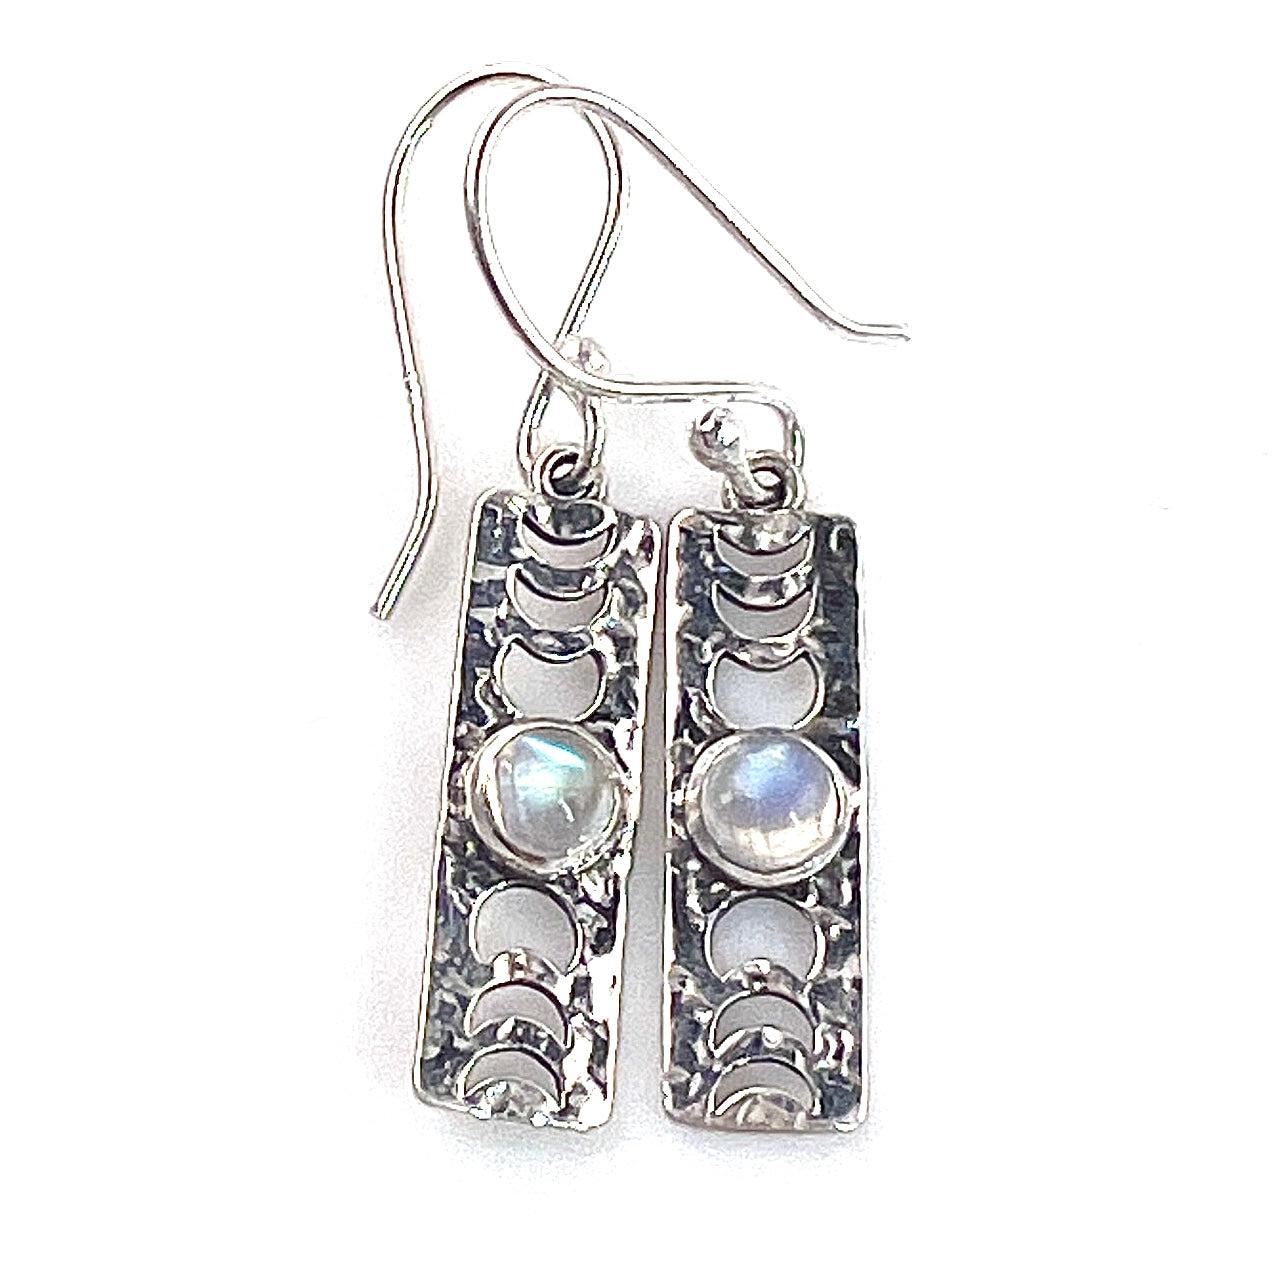 Moonstone Phases of the Moon Sterling Silver Earrings - Keja Designs Jewelry